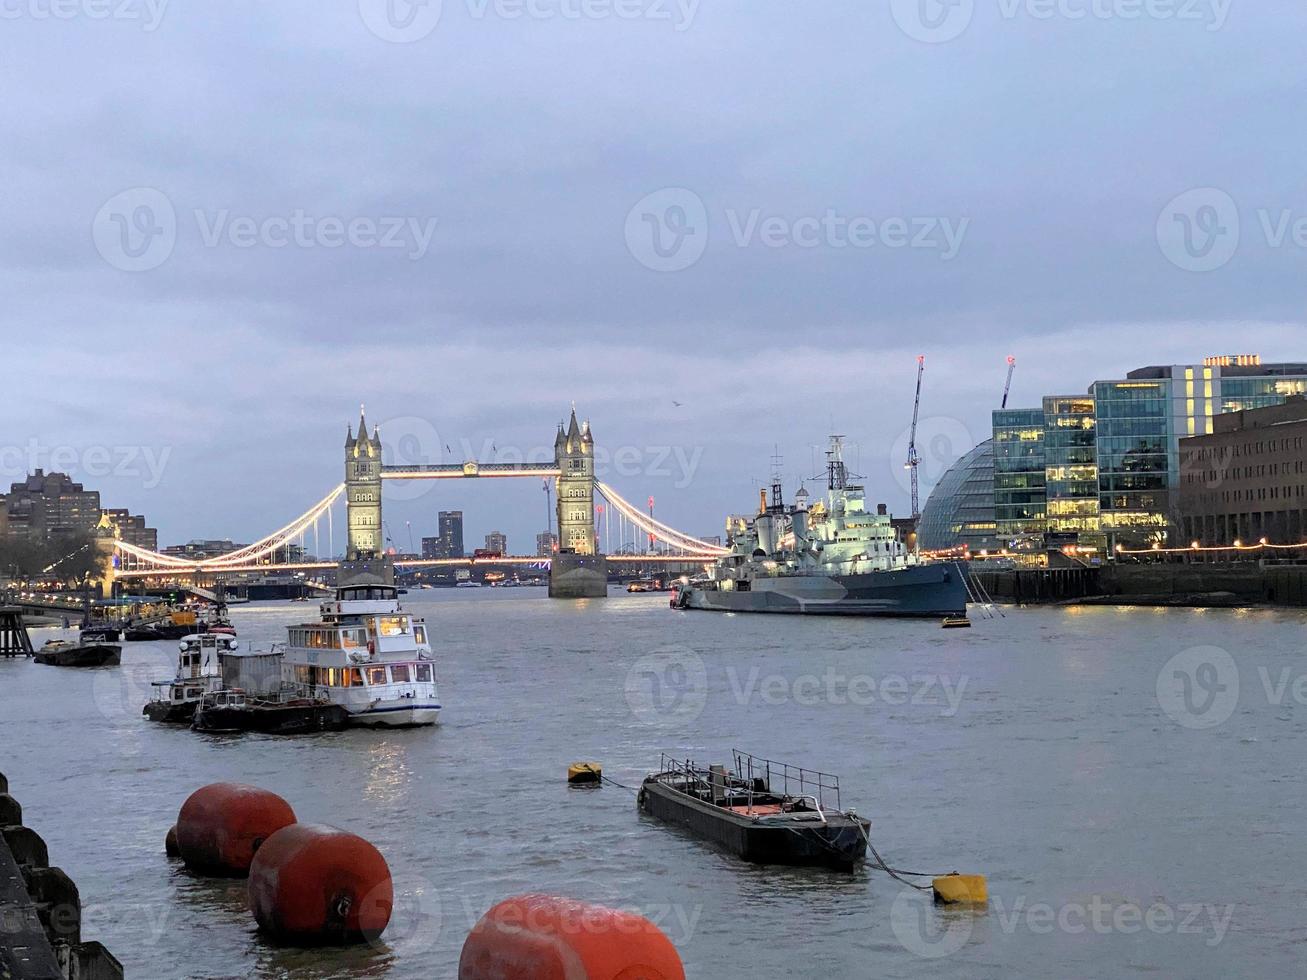 A view of the River Thames in London photo